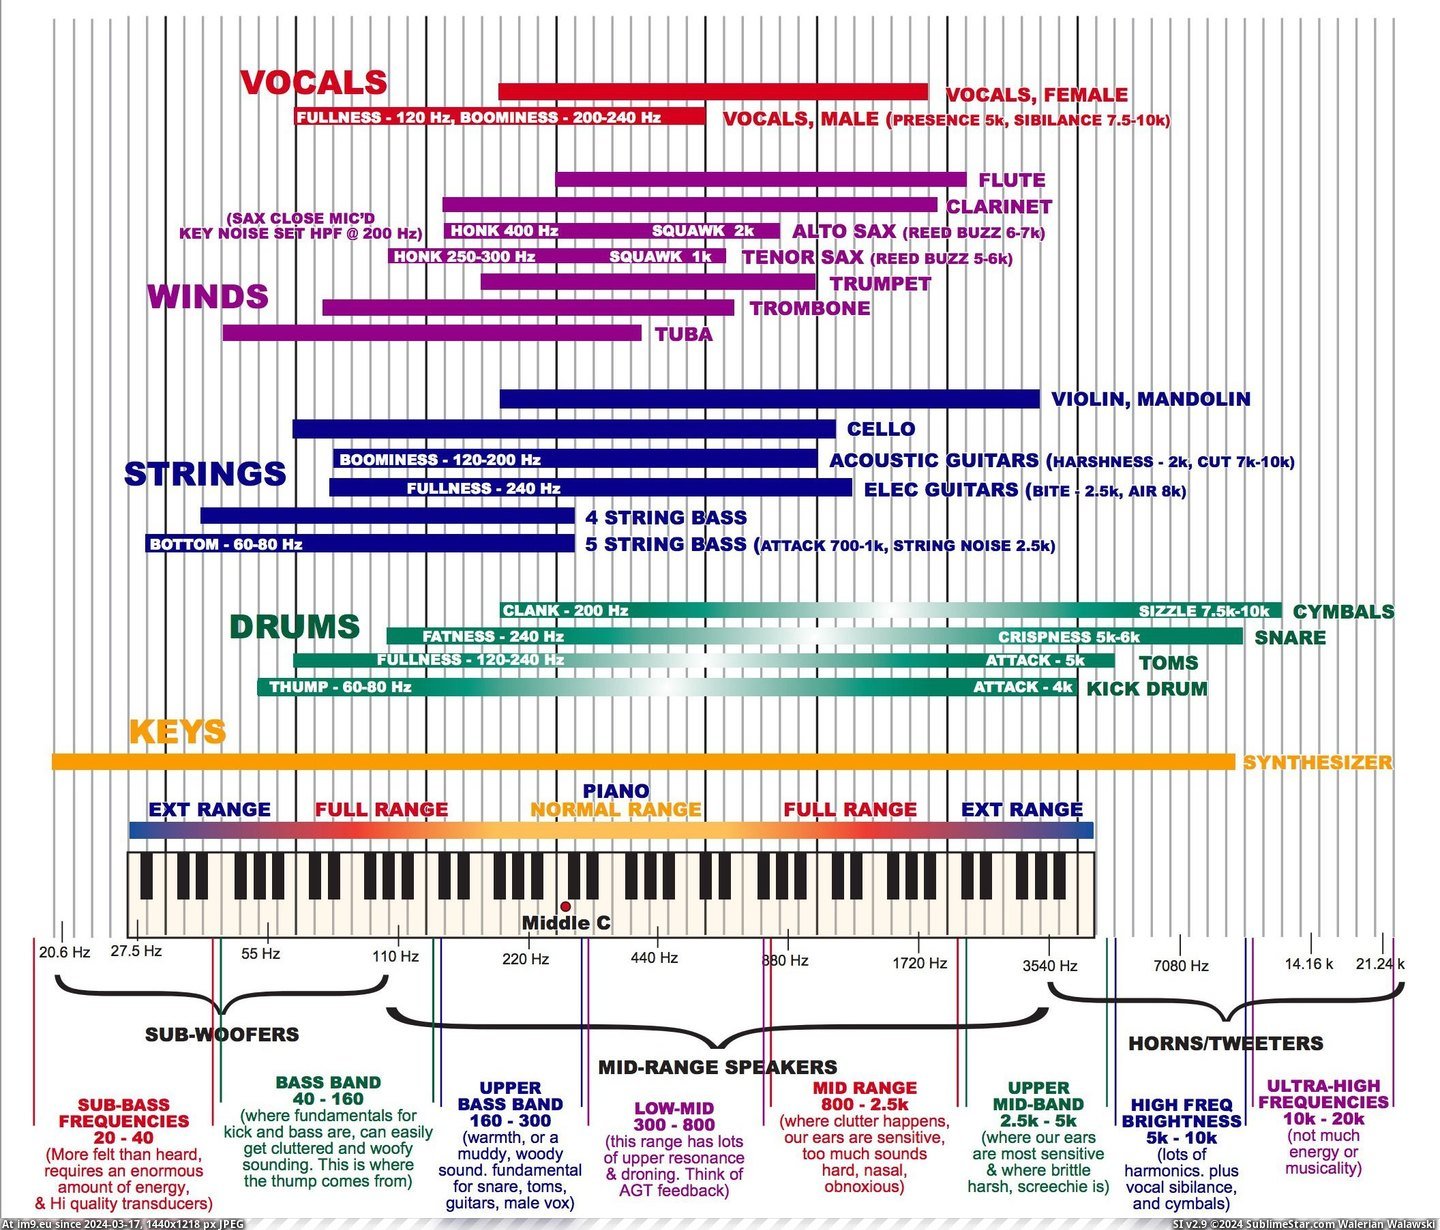 #Tips #Ranges #Spectrum #Frequency #Instrument [Dataisbeautiful] The Frequency Spectrum, Instrument Ranges, And EQ Tips Pic. (Изображение из альбом My r/DATAISBEAUTIFUL favs))